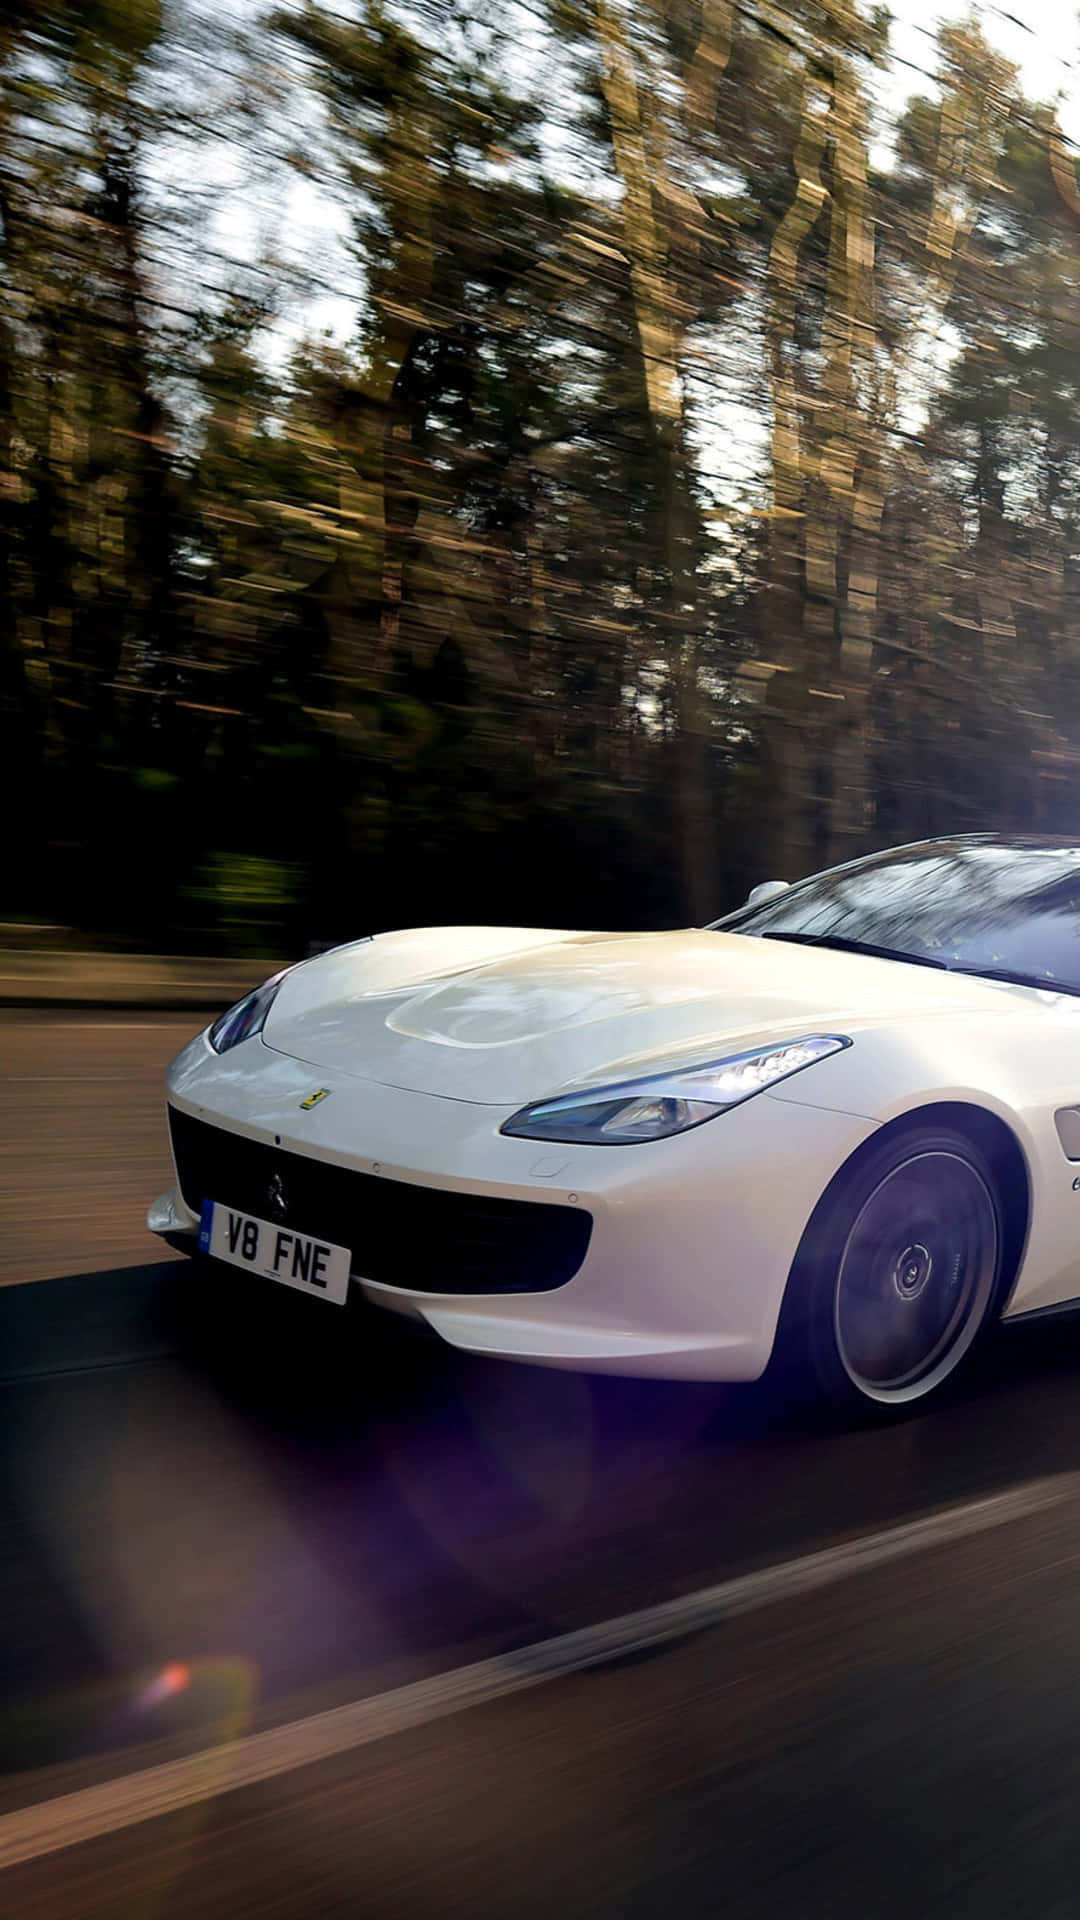 Add a bit of luxury to your life with a White Ferrari iPhone. Wallpaper